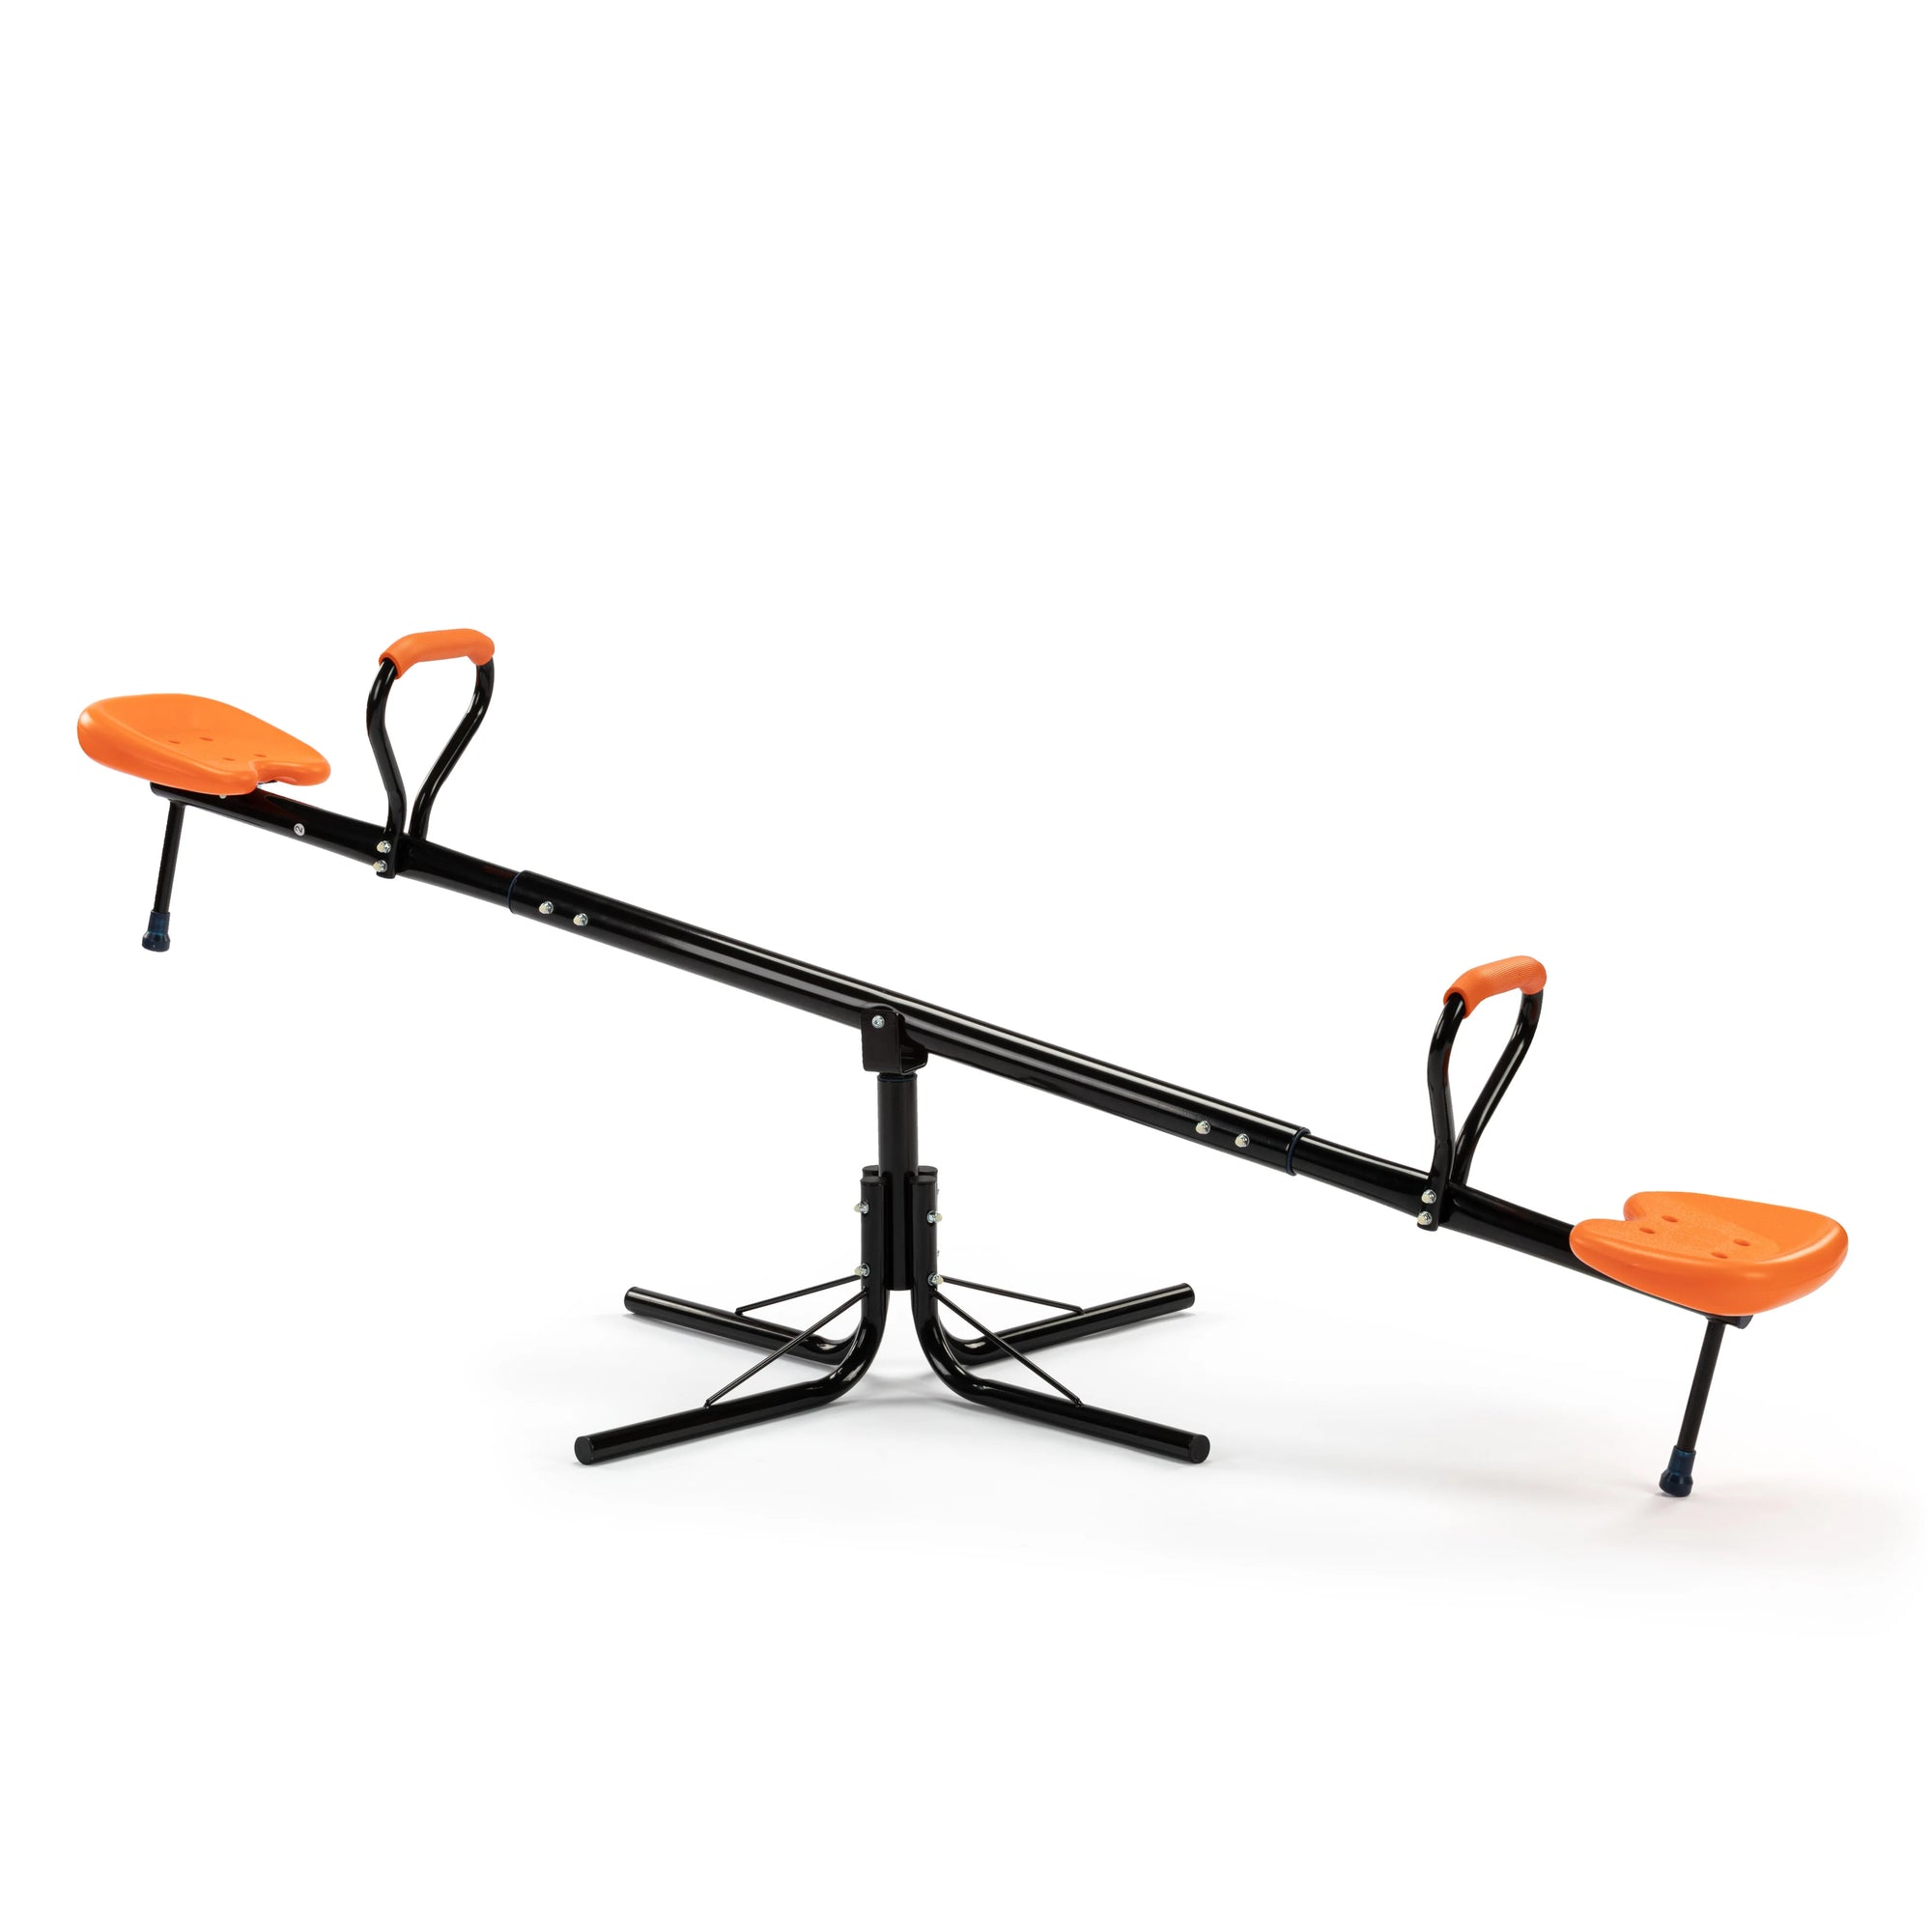 Action Spinning Seesaw 360 Rotation - 1 BOX